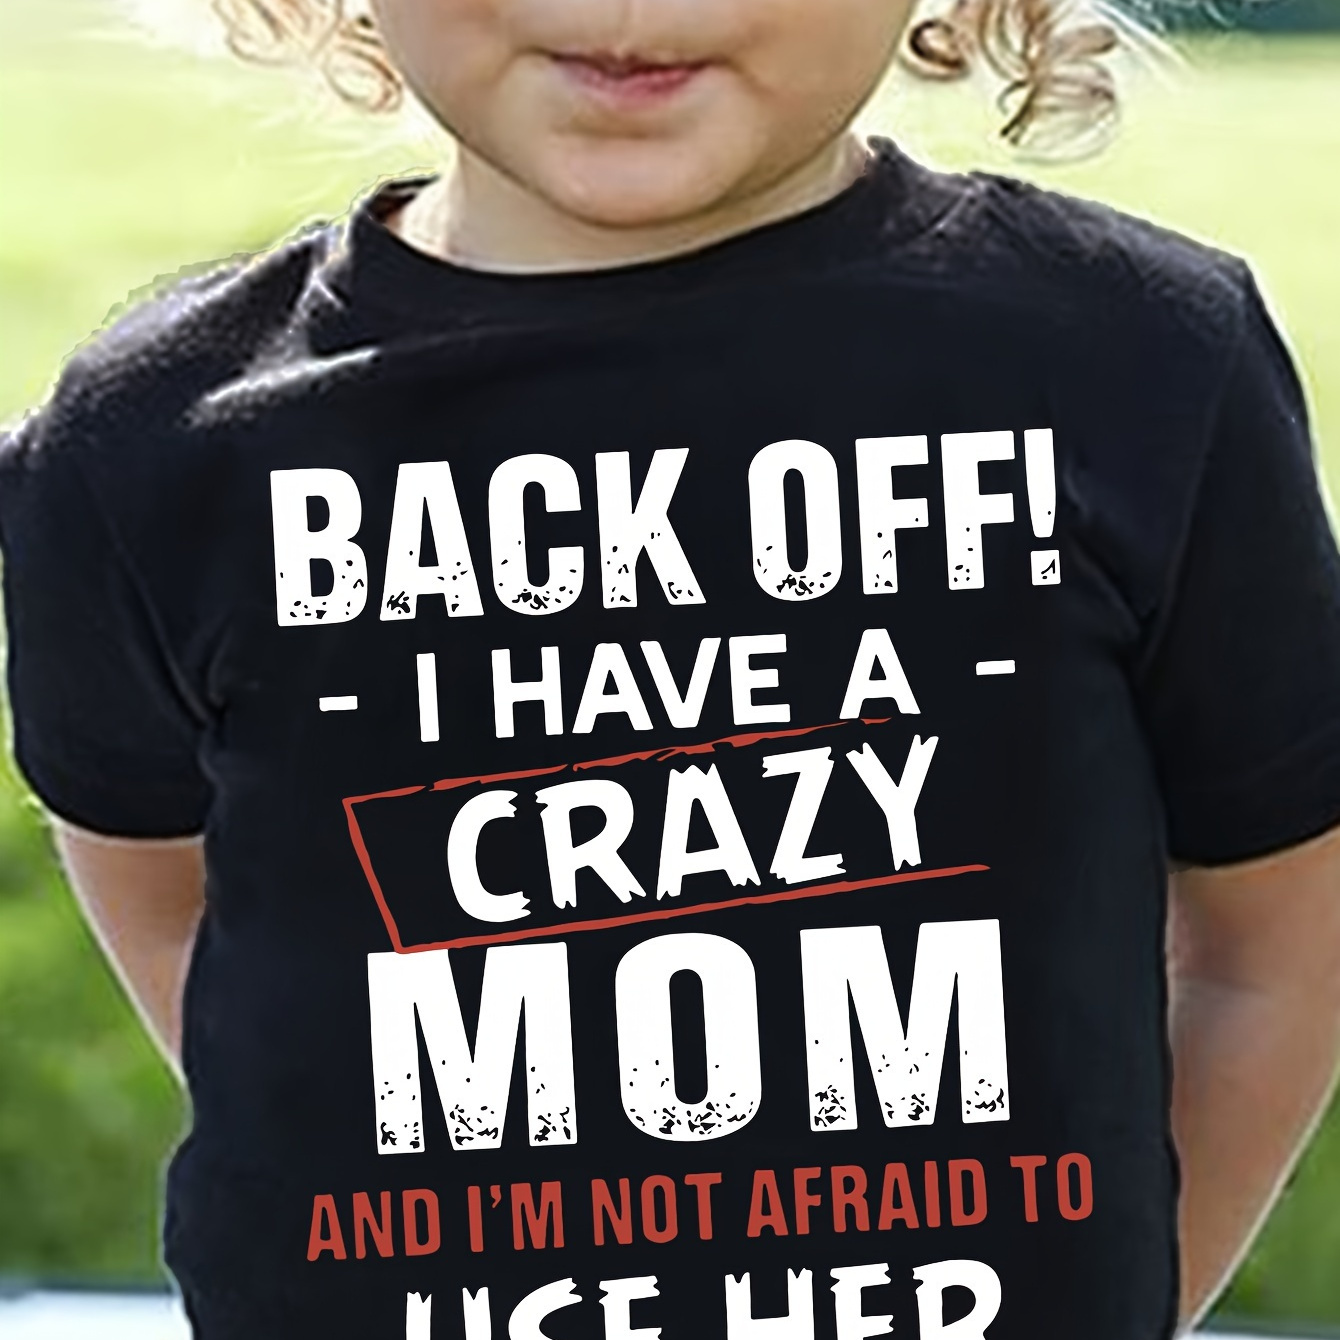 

Back Off I Have A Crazy Mom Print, Girls' Casual & Comfy Crew Neck Short Sleeve T-shirt For Spring & Summer, Girls' Clothes For Outdoor Activities